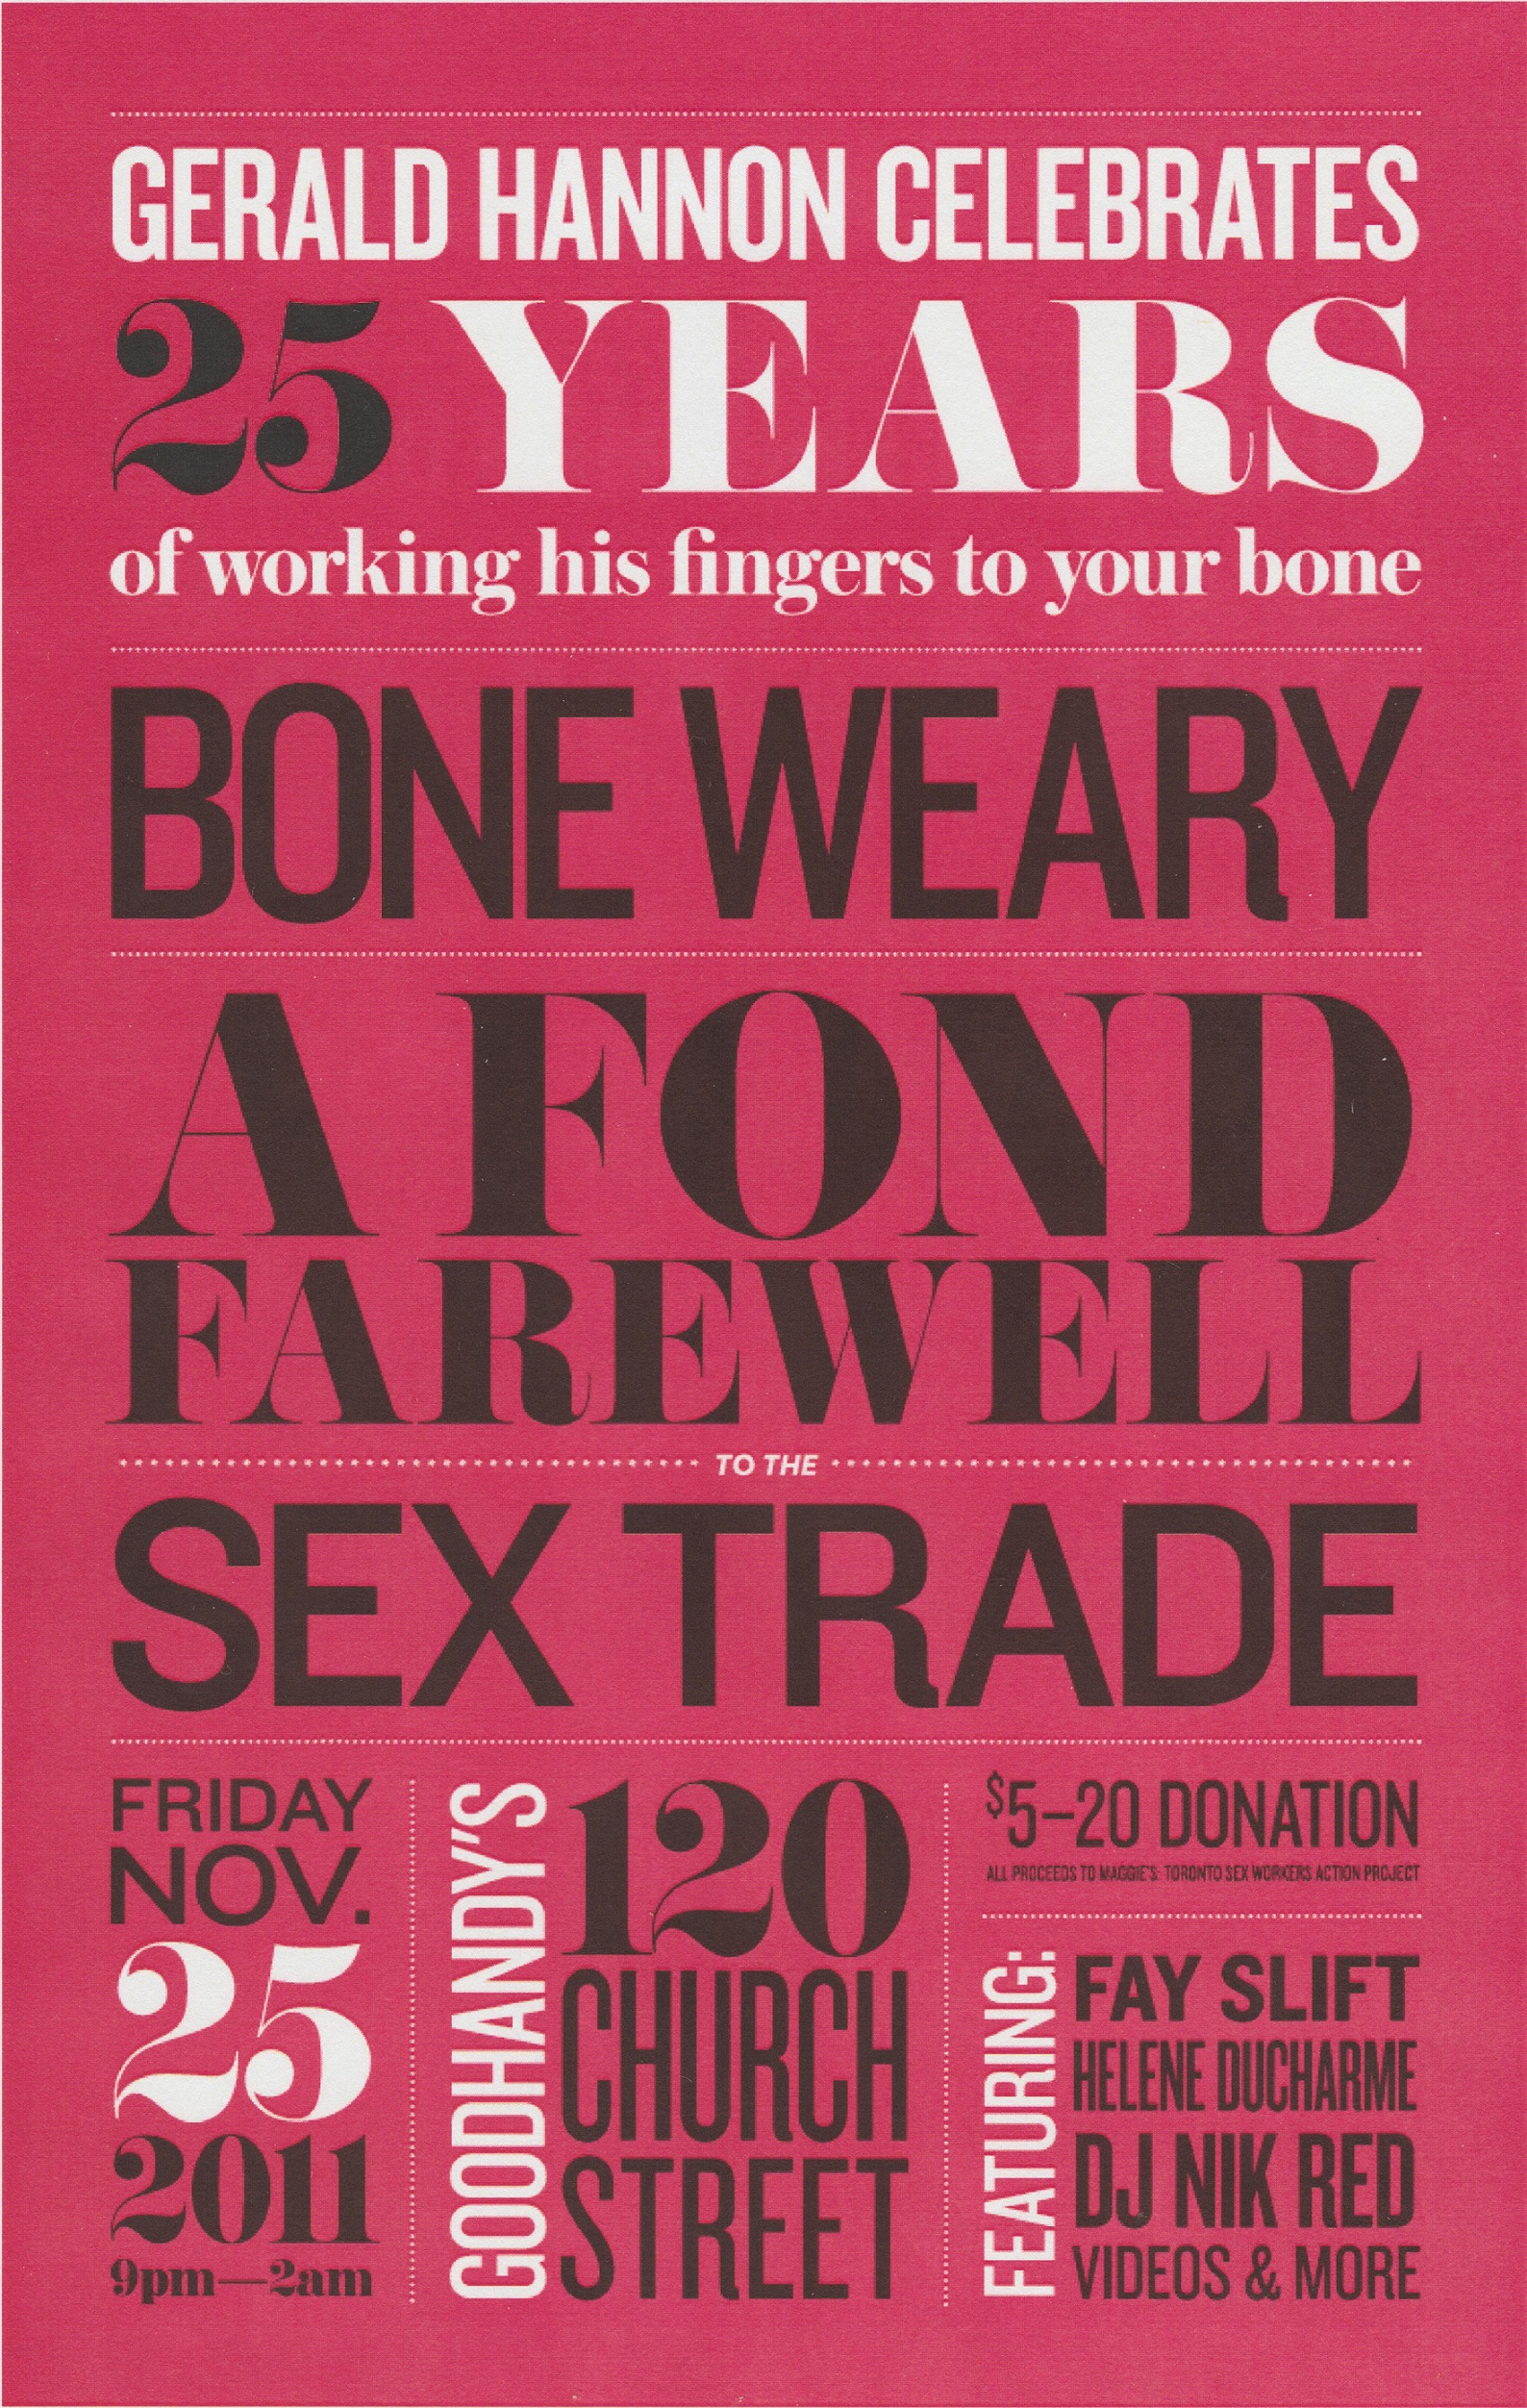 Gerald Hannon retired from sex work poster